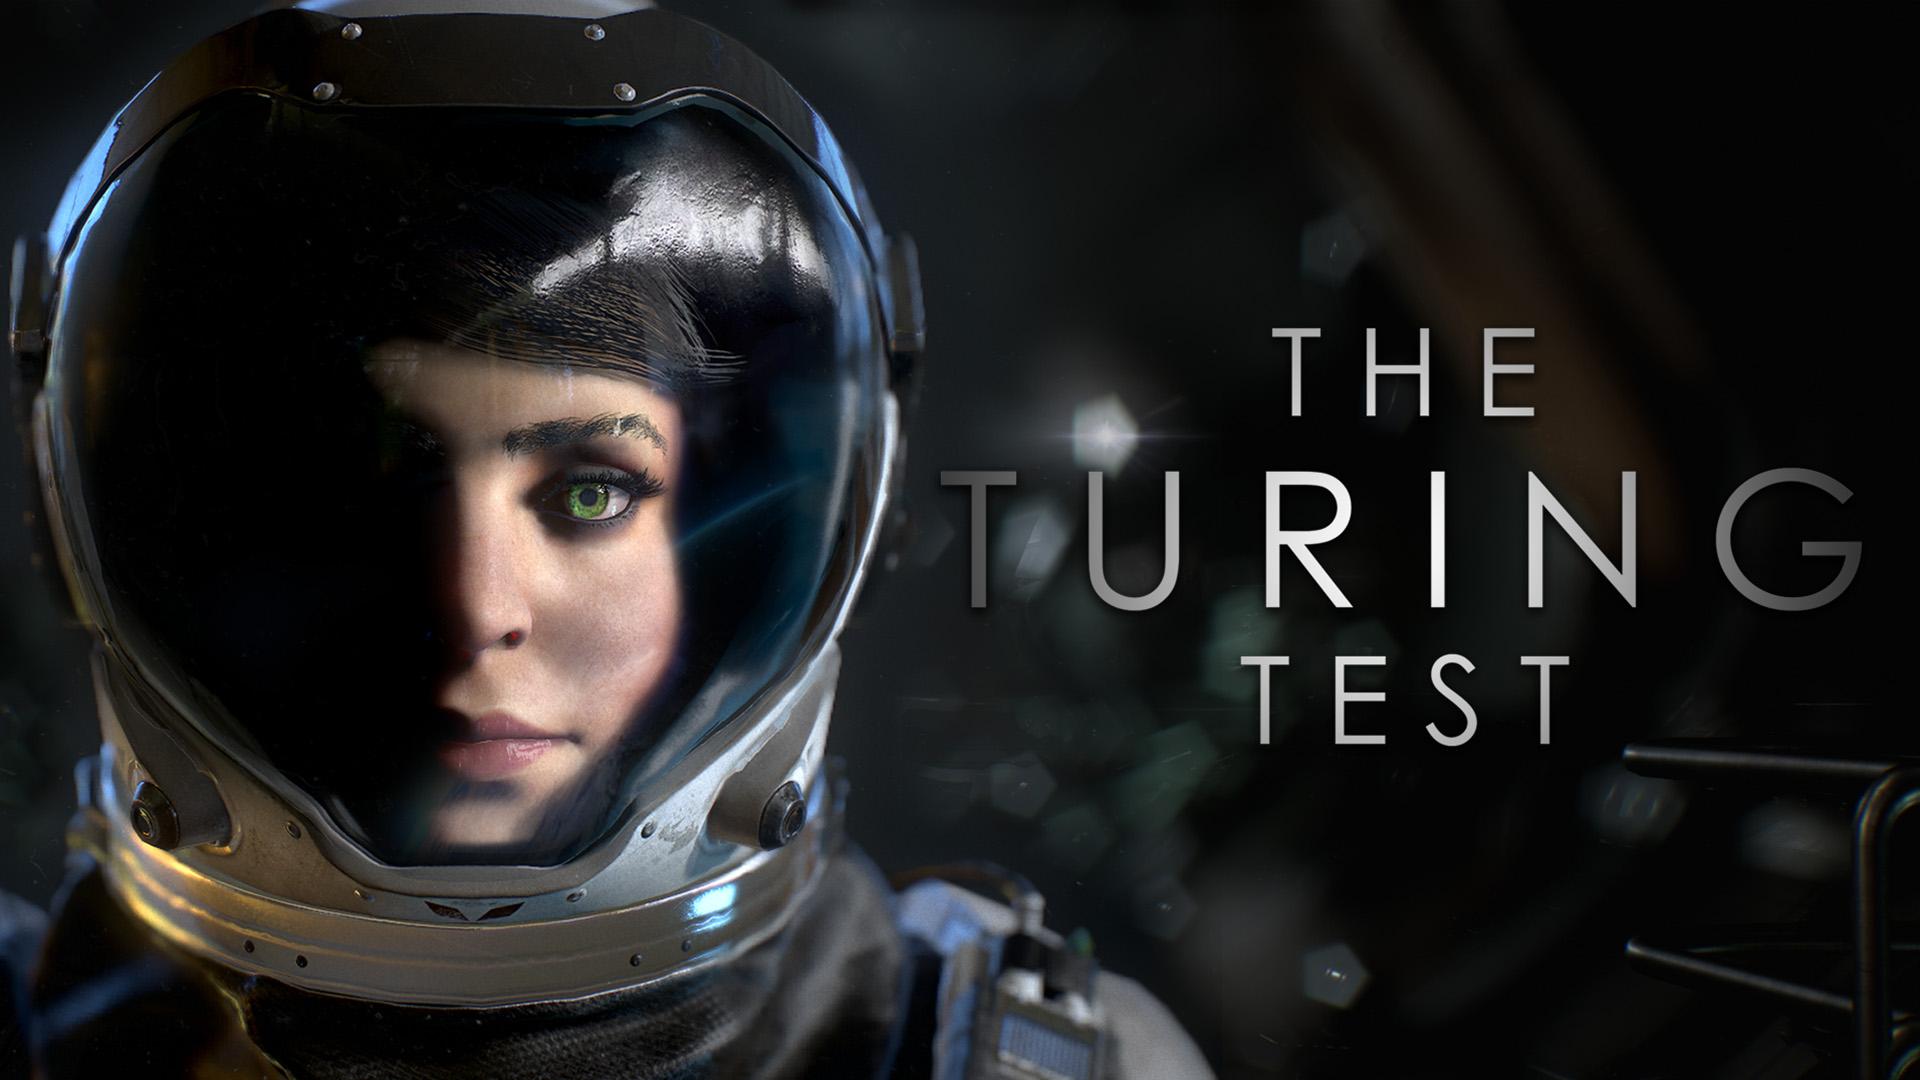 Good morning Ava. Wallpaper from The Turing Test